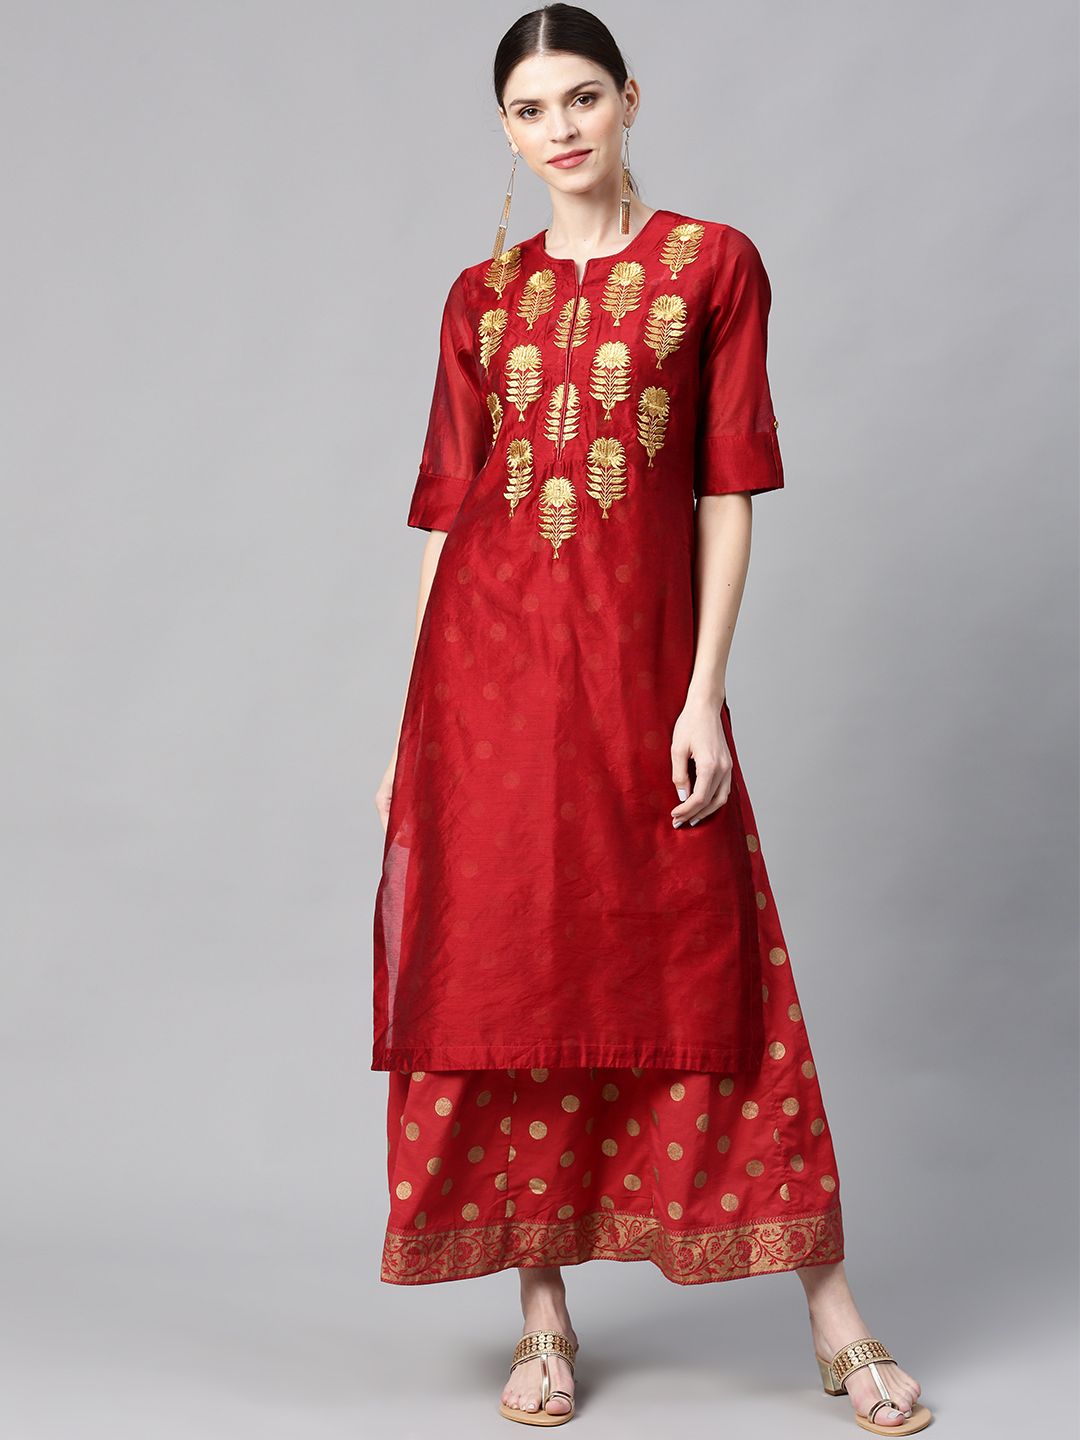 Juniper Women Maroon & Golden Embroidered Layered Maxi Dress Price in India